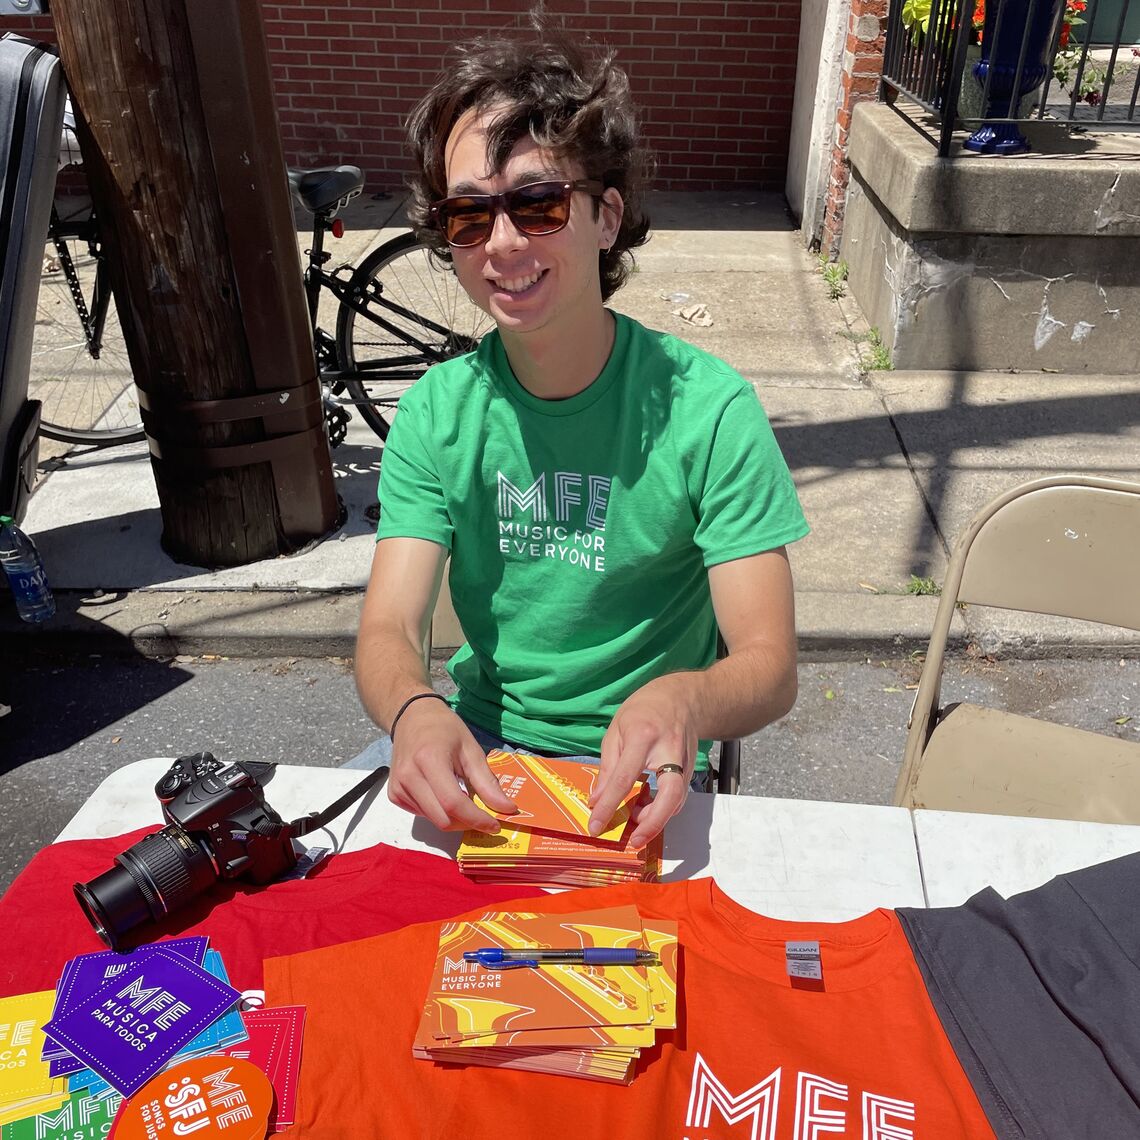 Reece Chang '24 is spending his summer working with Lancaster nonprofit Music for Everyone (MFE).